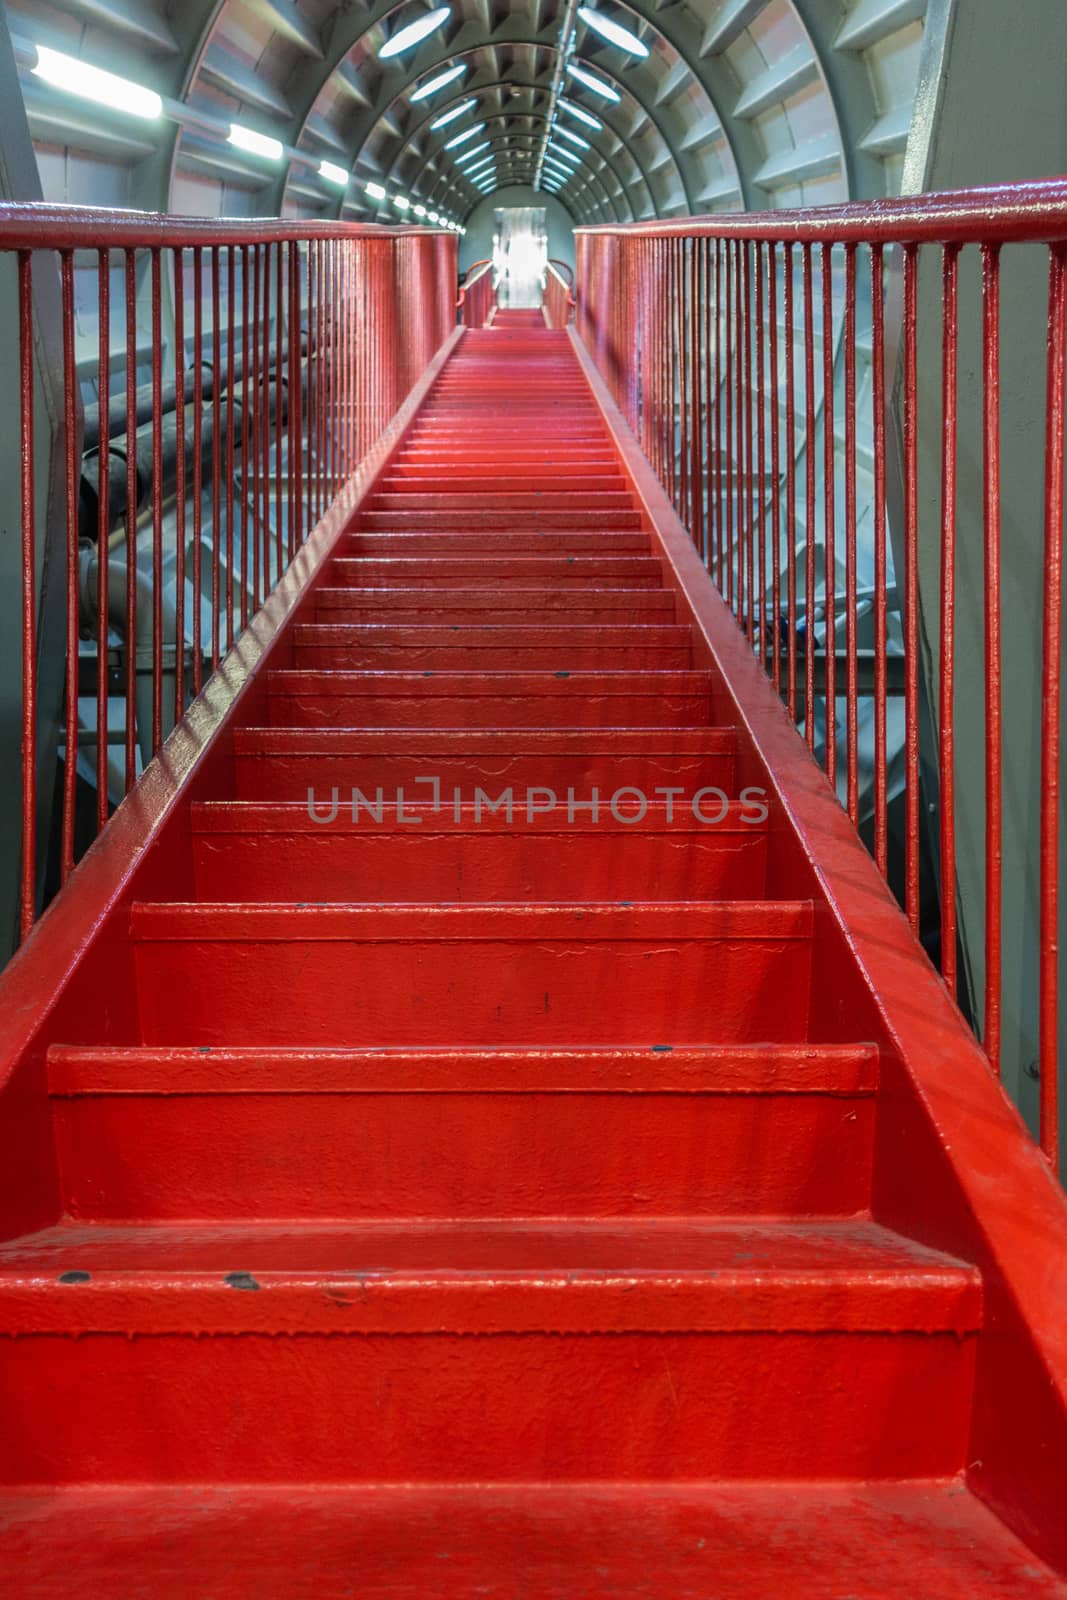 Brussels, Belgium - September 25, 2018: Red endless-like stairway to nowhere or heaven through one tube of Atomium Momument.